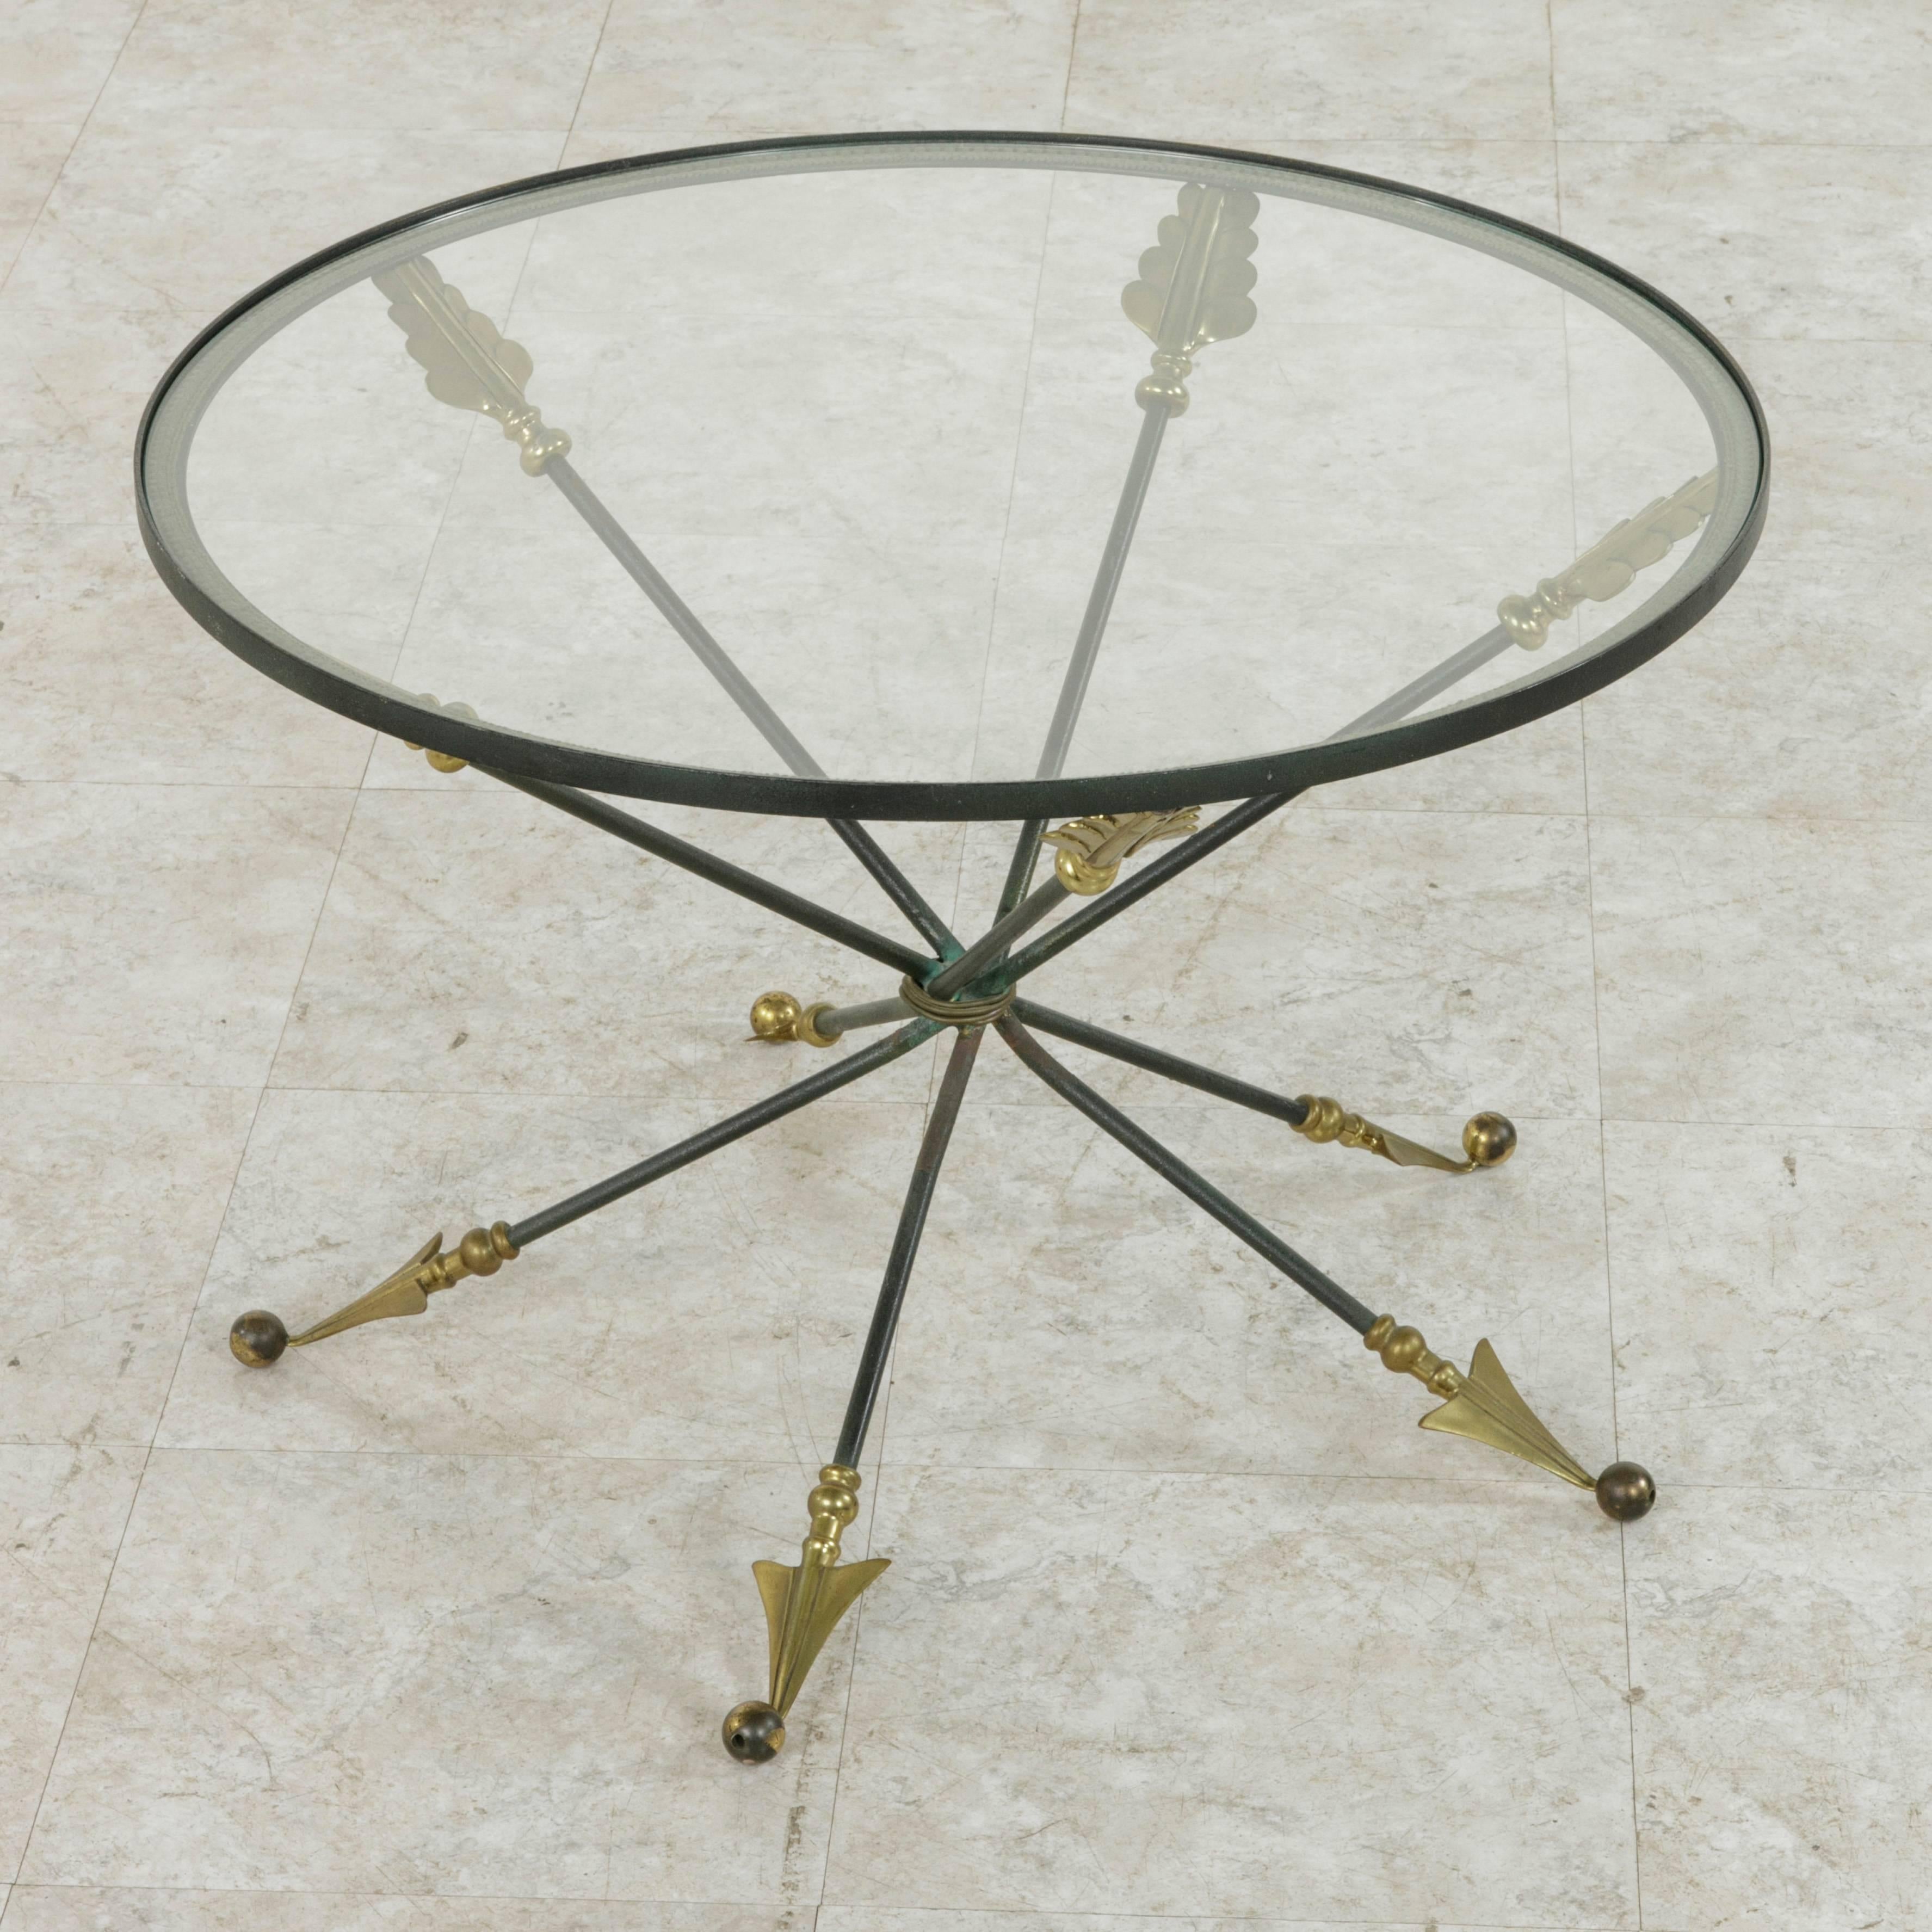 This midcentury French coffee table features a round glass top supported by a Directoire inspired bronze base with five crossed arrows bound together by a bronze ring. The aged verdigris patina of the base contrasts beautifully with the polished